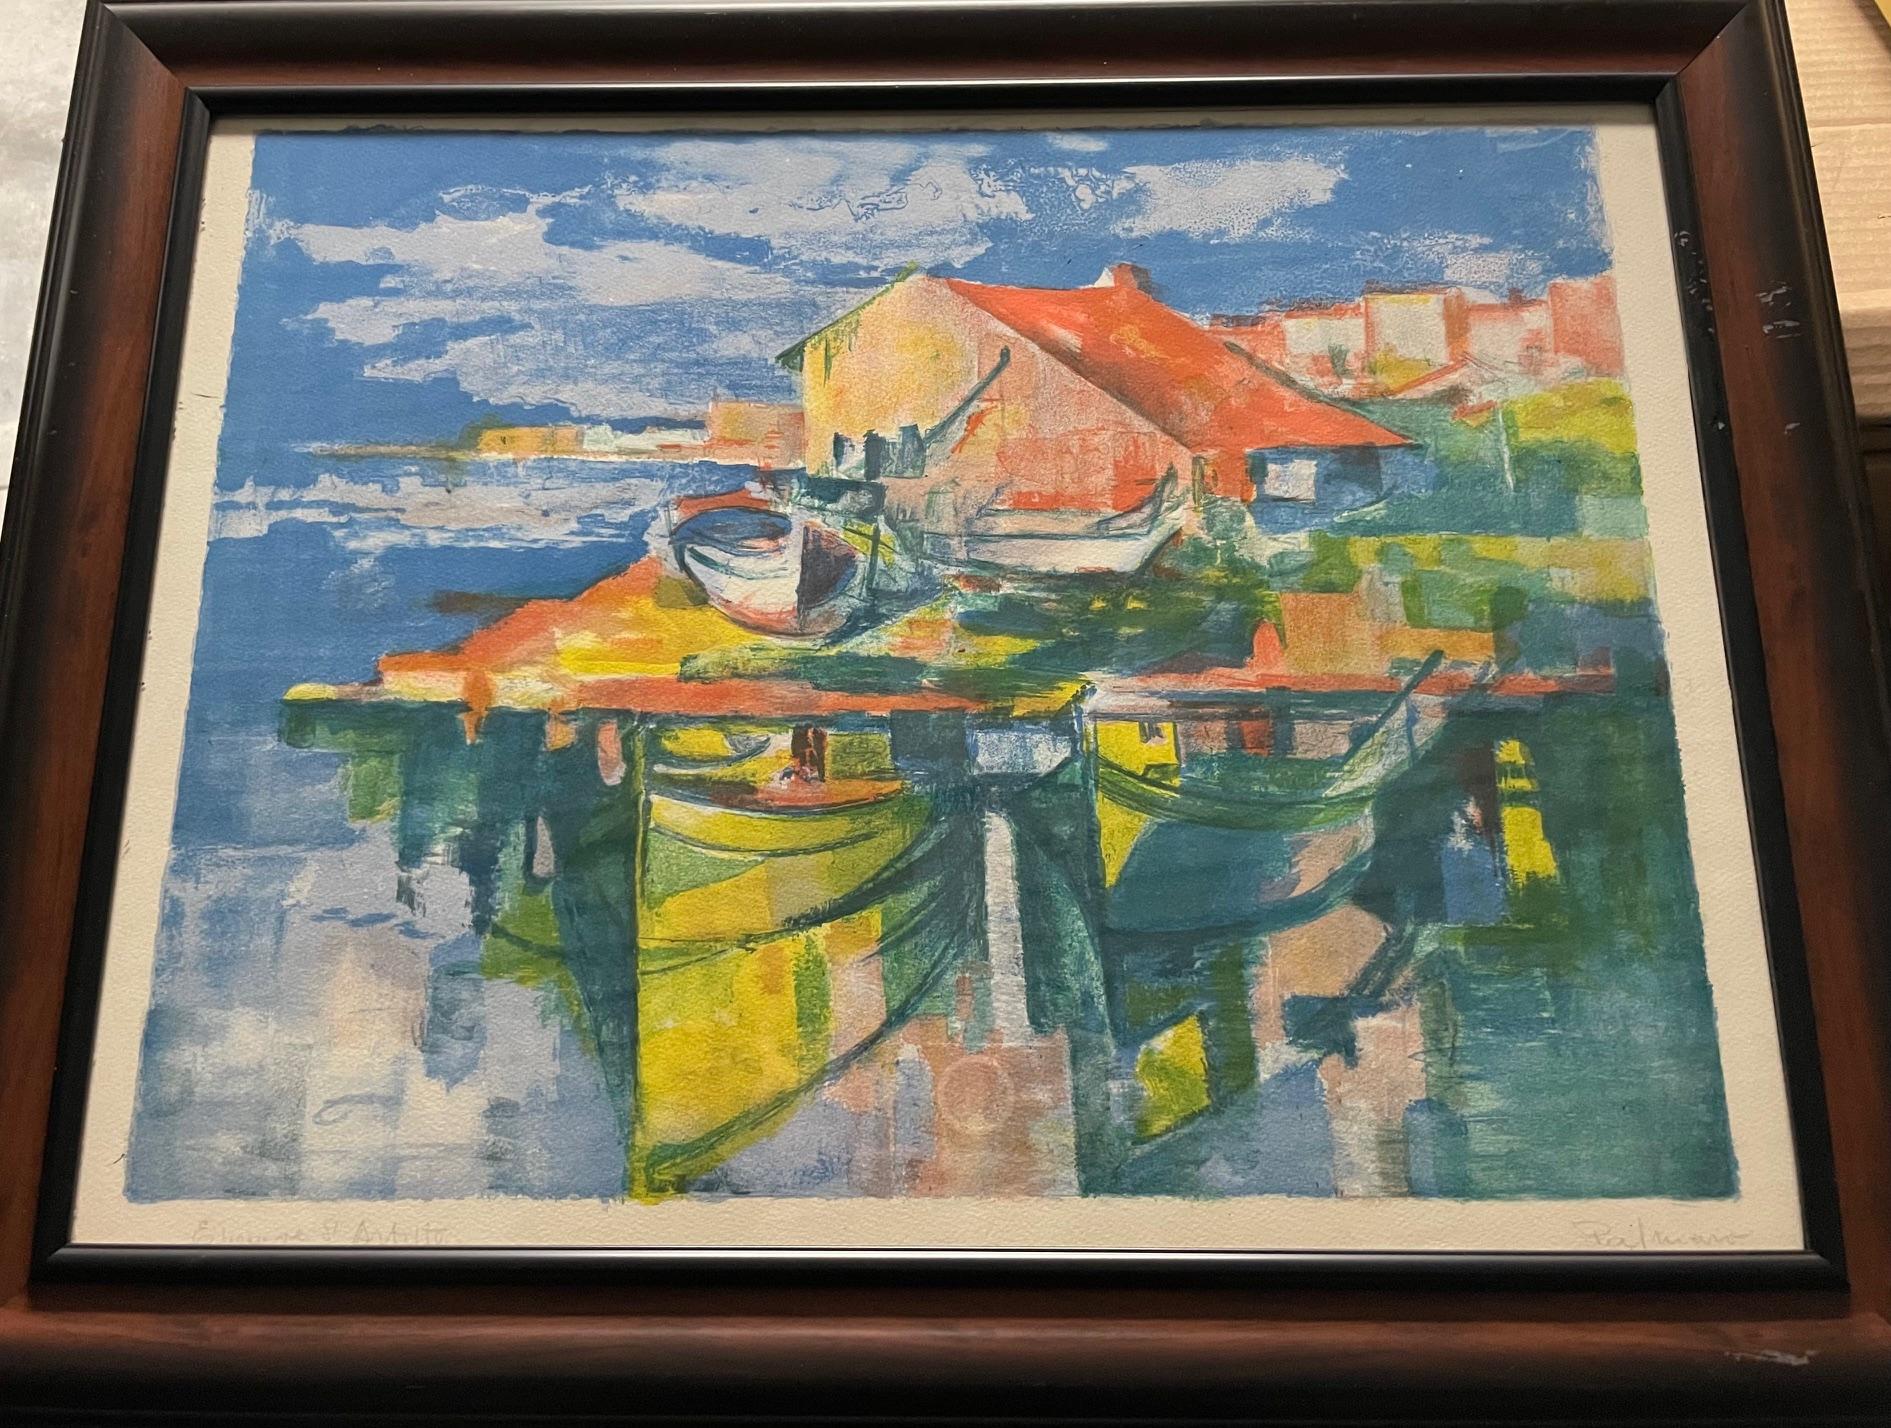 Nautical abstract expressionist painting that is signed by the artist, but spelling of name is unclear:   either 
Palermo or Palmaro?   Signed in bottom right corner.

Bottom Left corner has some penciled words that may indicate a title, but again,